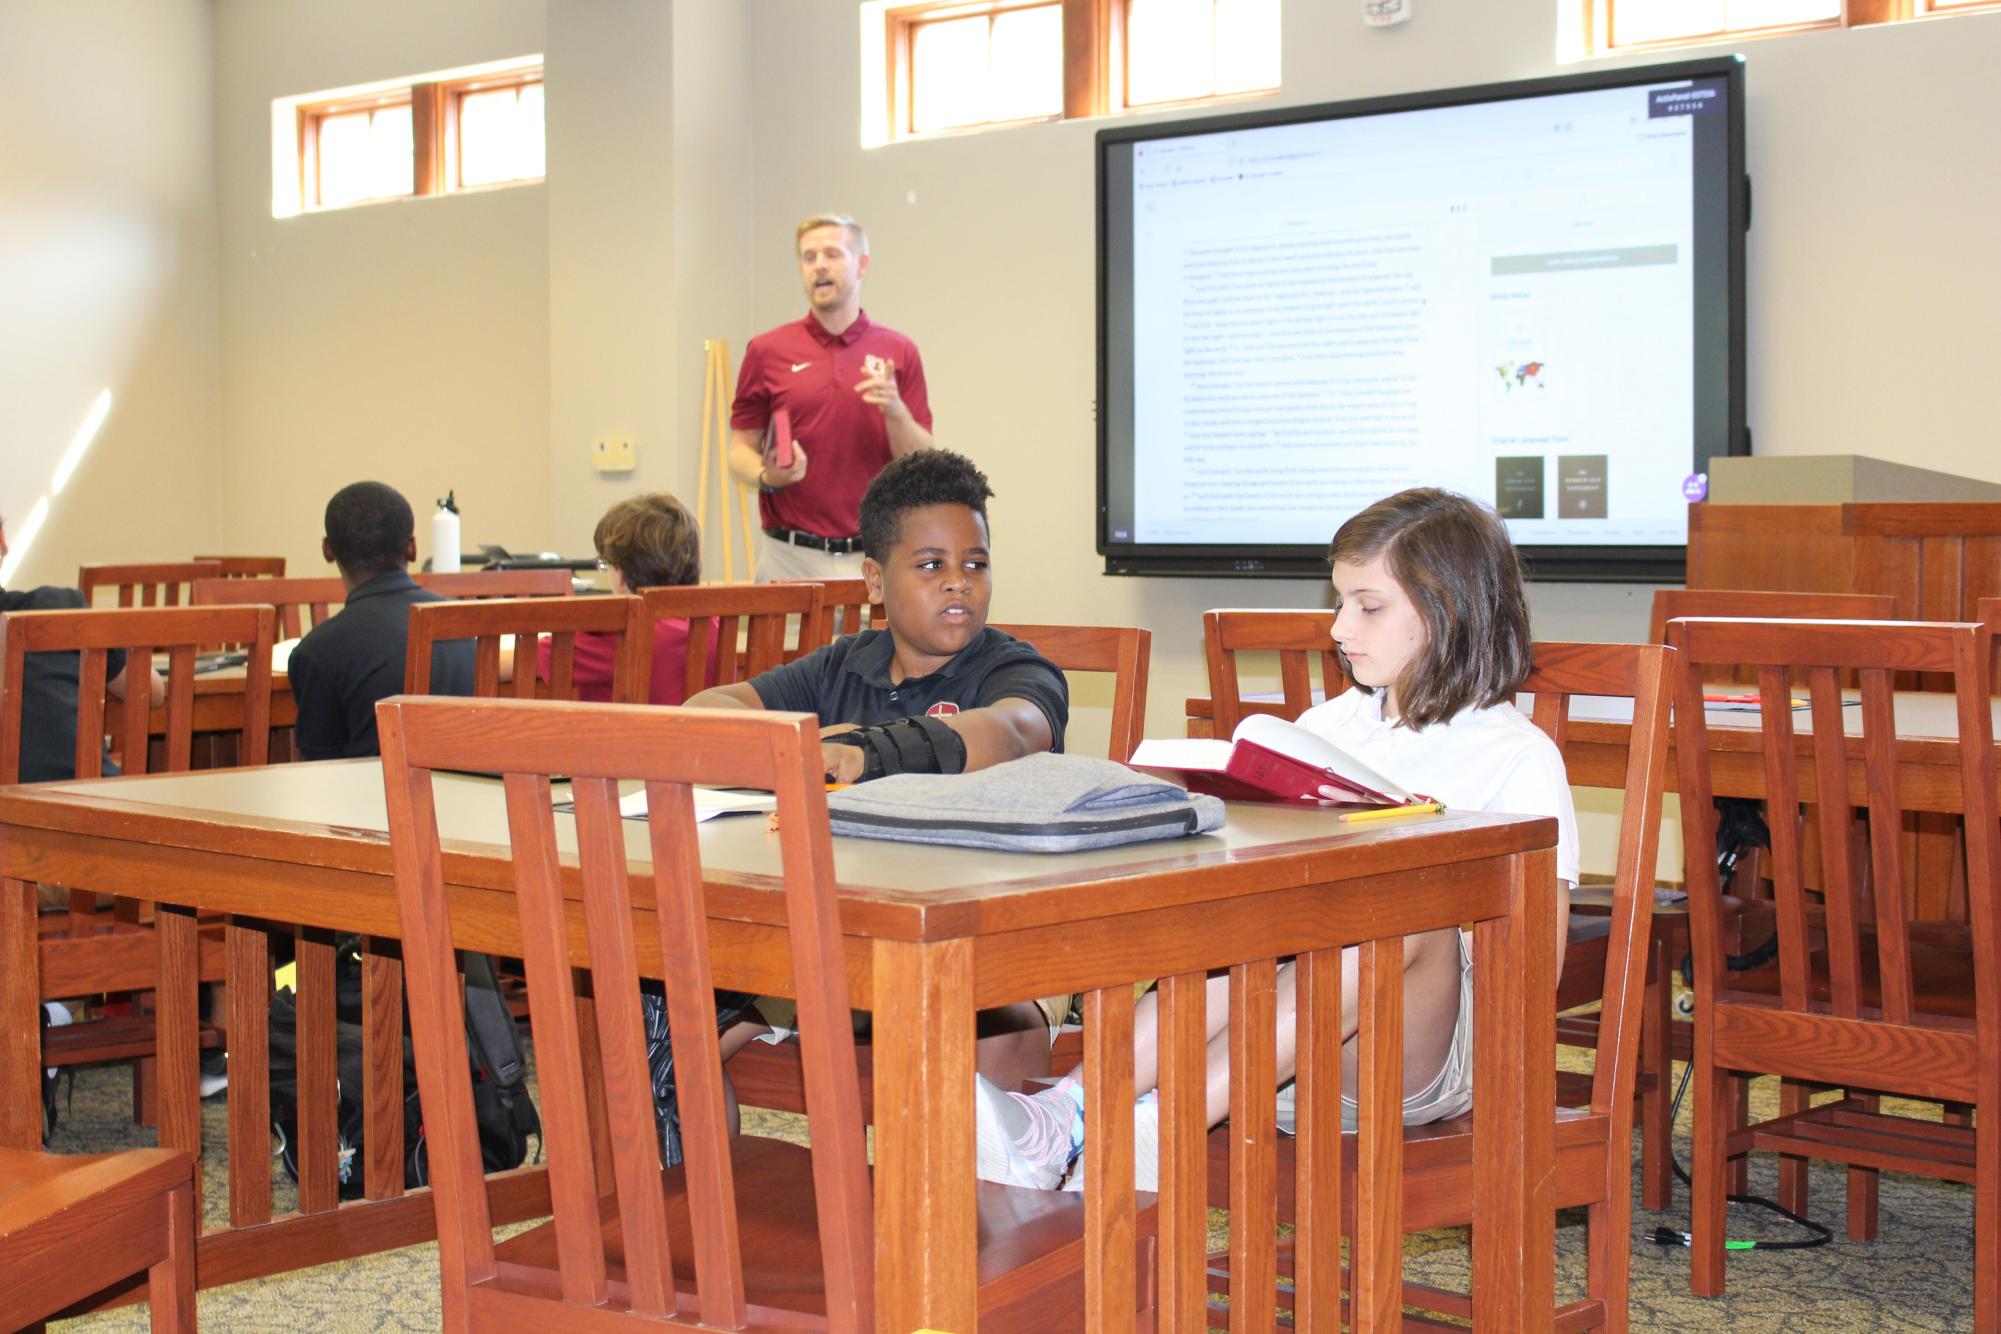 Mr. Nick Whicker uses the Learning Commons for his middle school religion class, where students are collaborating.